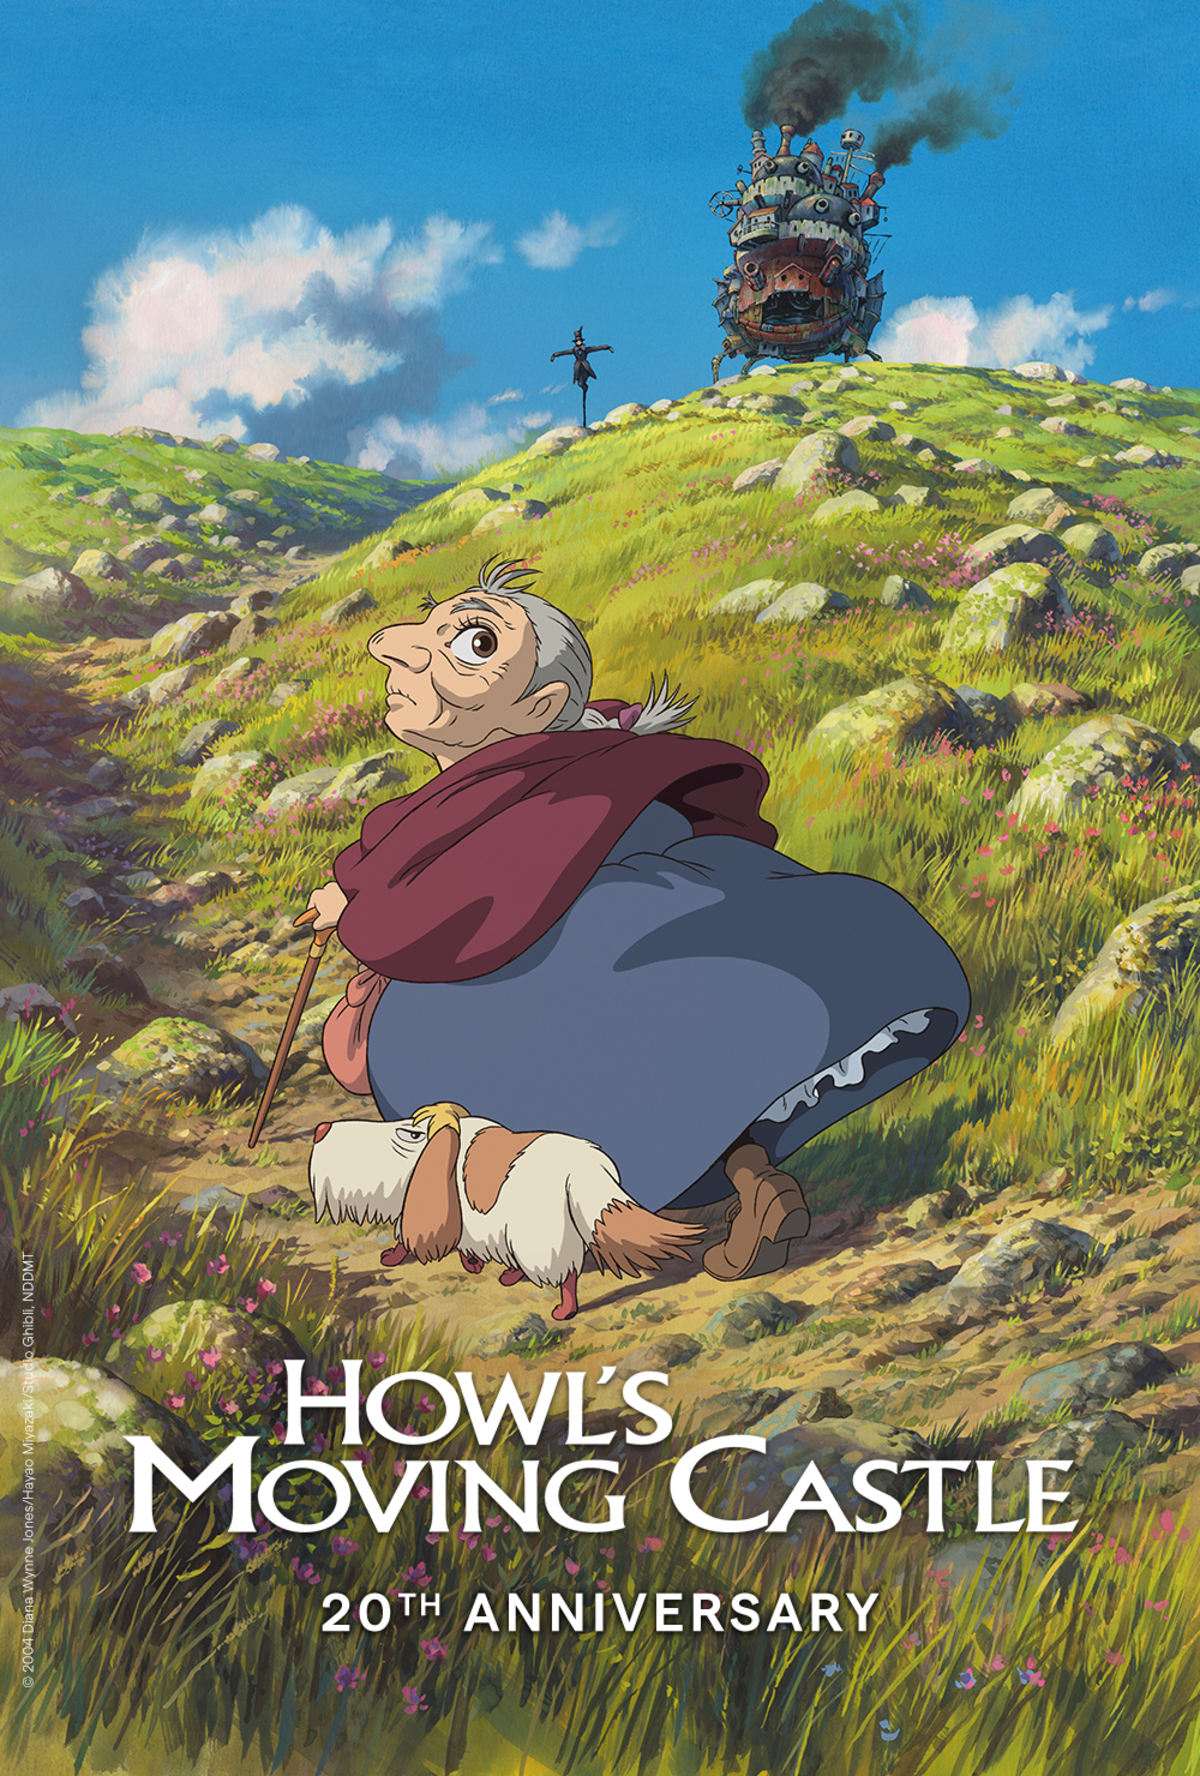 Howl’s Moving Castle 20th Anniversary